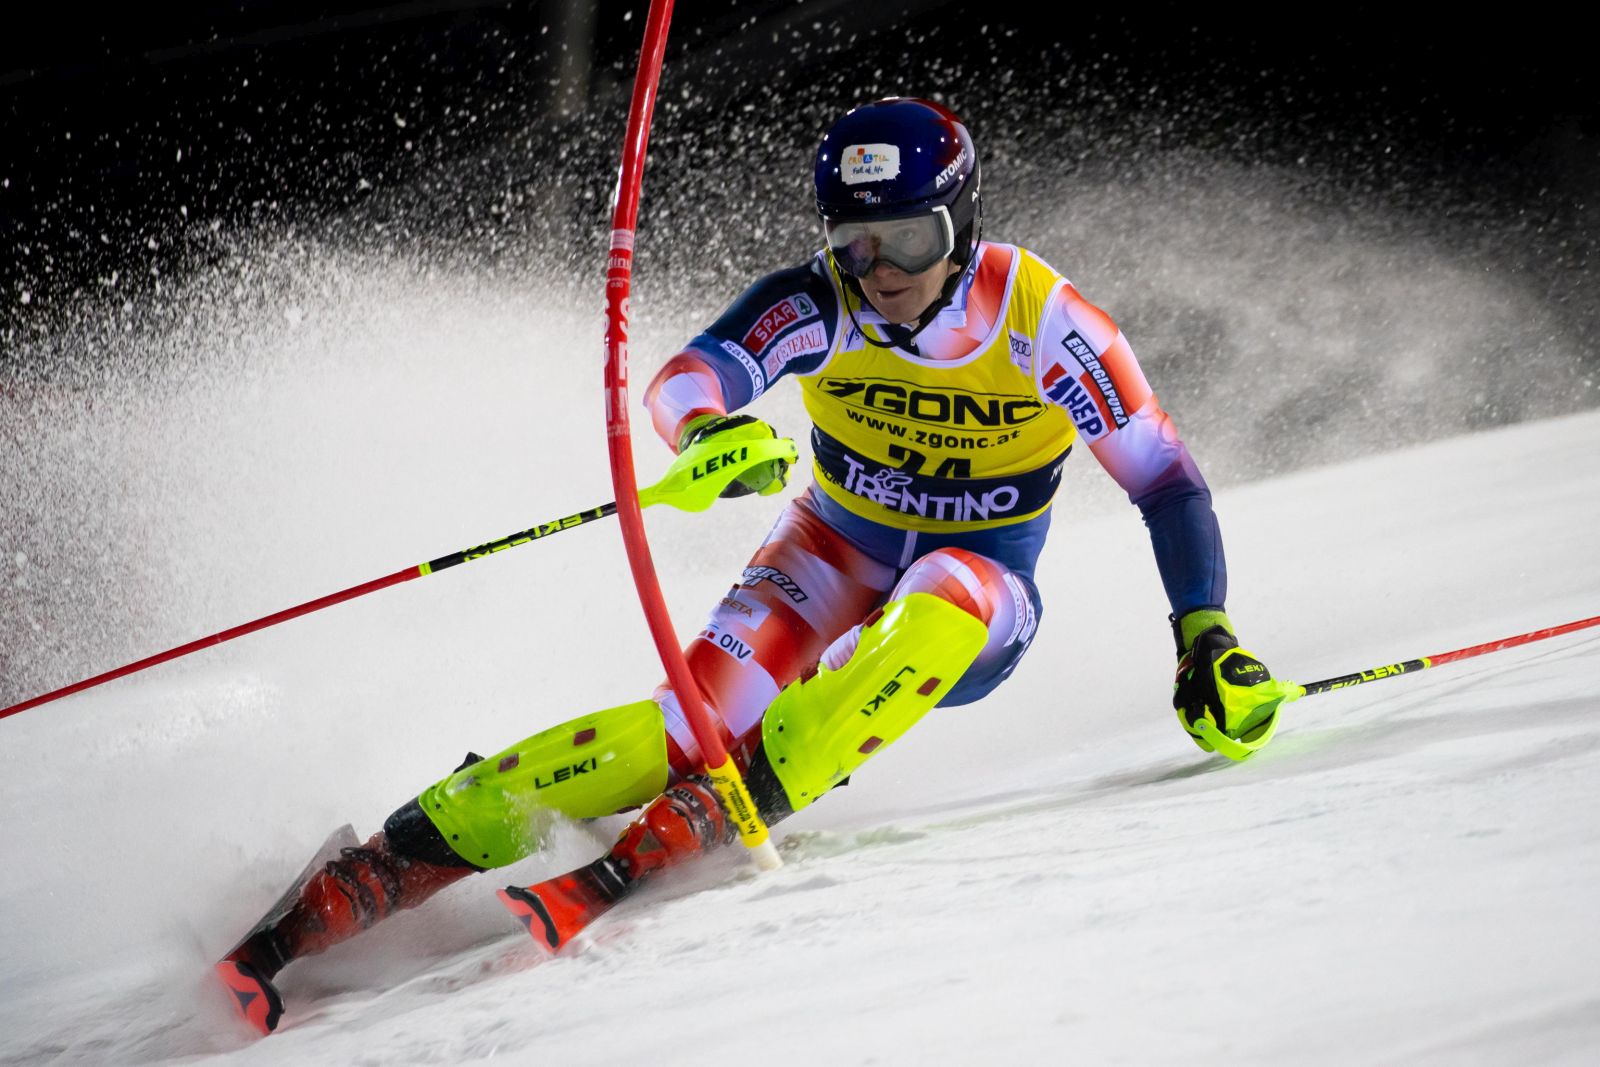 epa11041235 Filip Zubcic of Croatia clears a gate during the first run of the Men's Slalom race at the FIS Alpine Skiing World Cup in Madonna di Campiglio, Italy, 22 December 2023.  EPA/ANDREA SOLERO